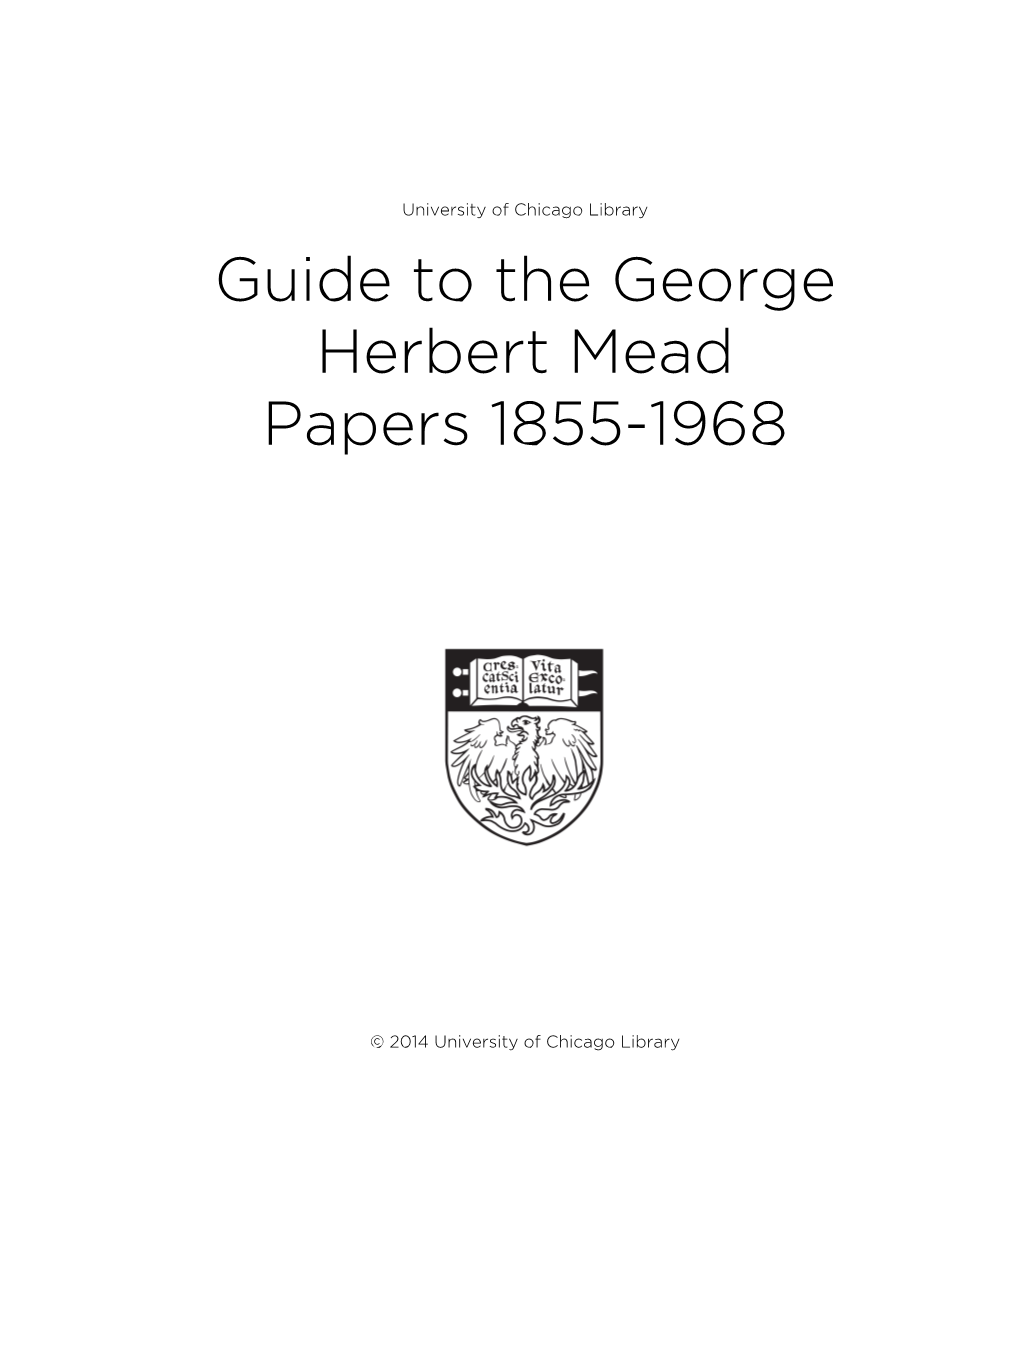 Guide to the George Herbert Mead Papers 1855-1968